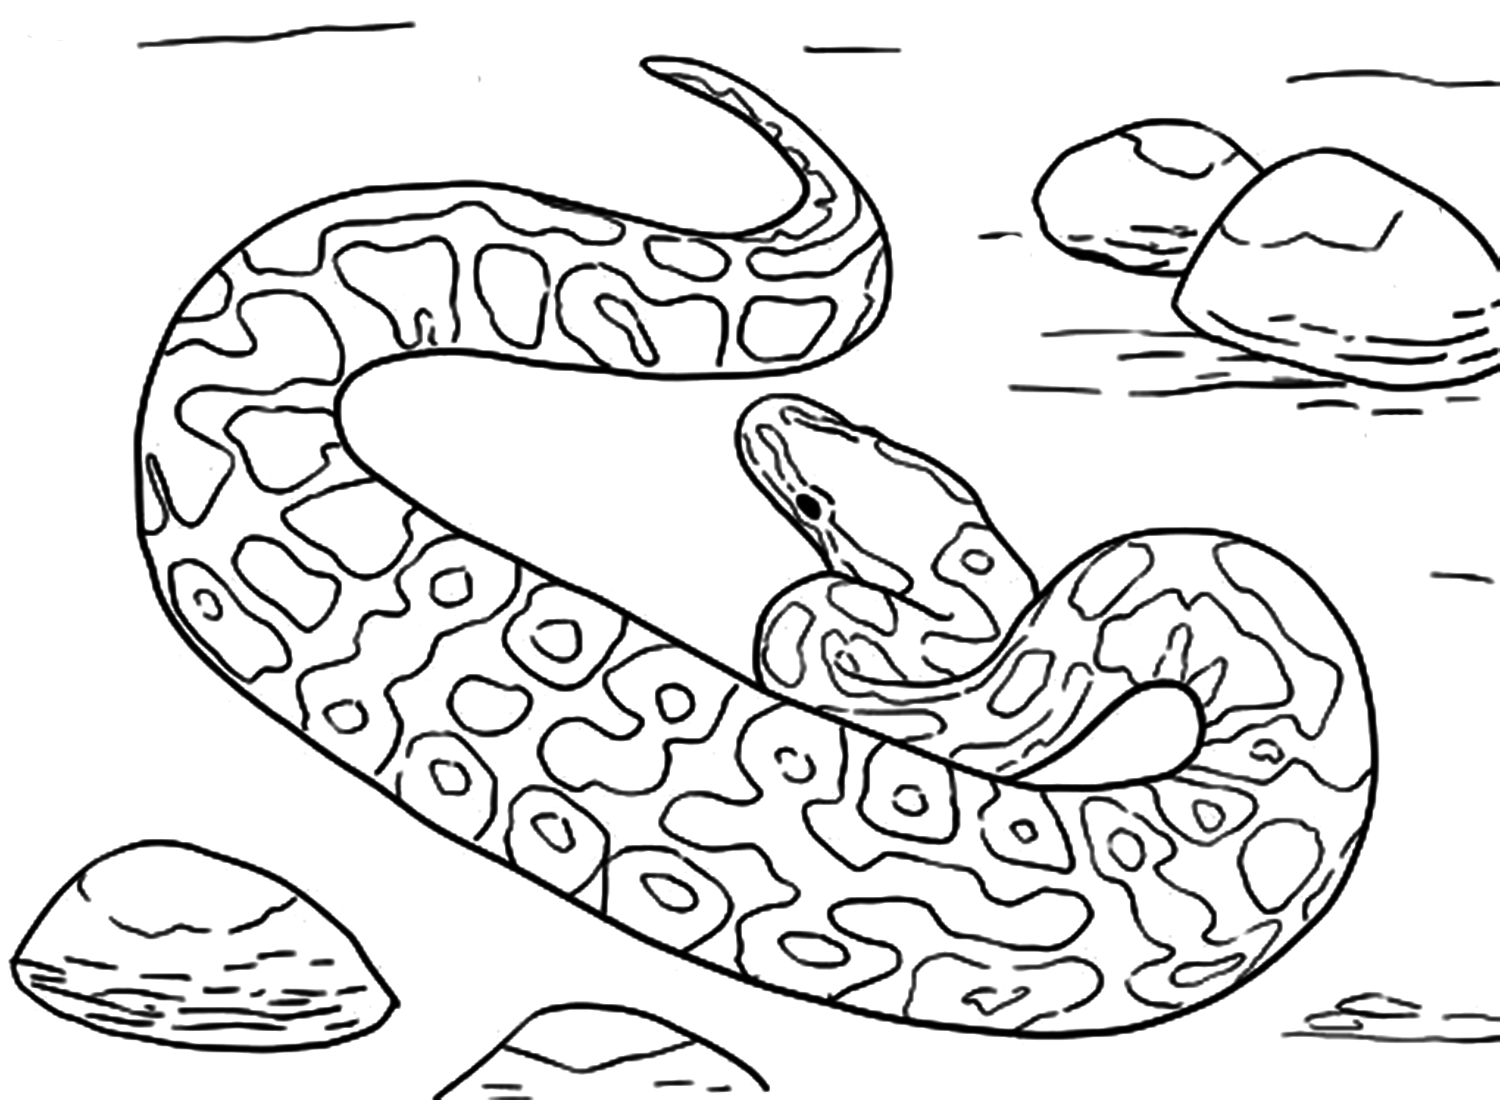 Printable Python Coloring Sheet Free Printable Coloring Pages